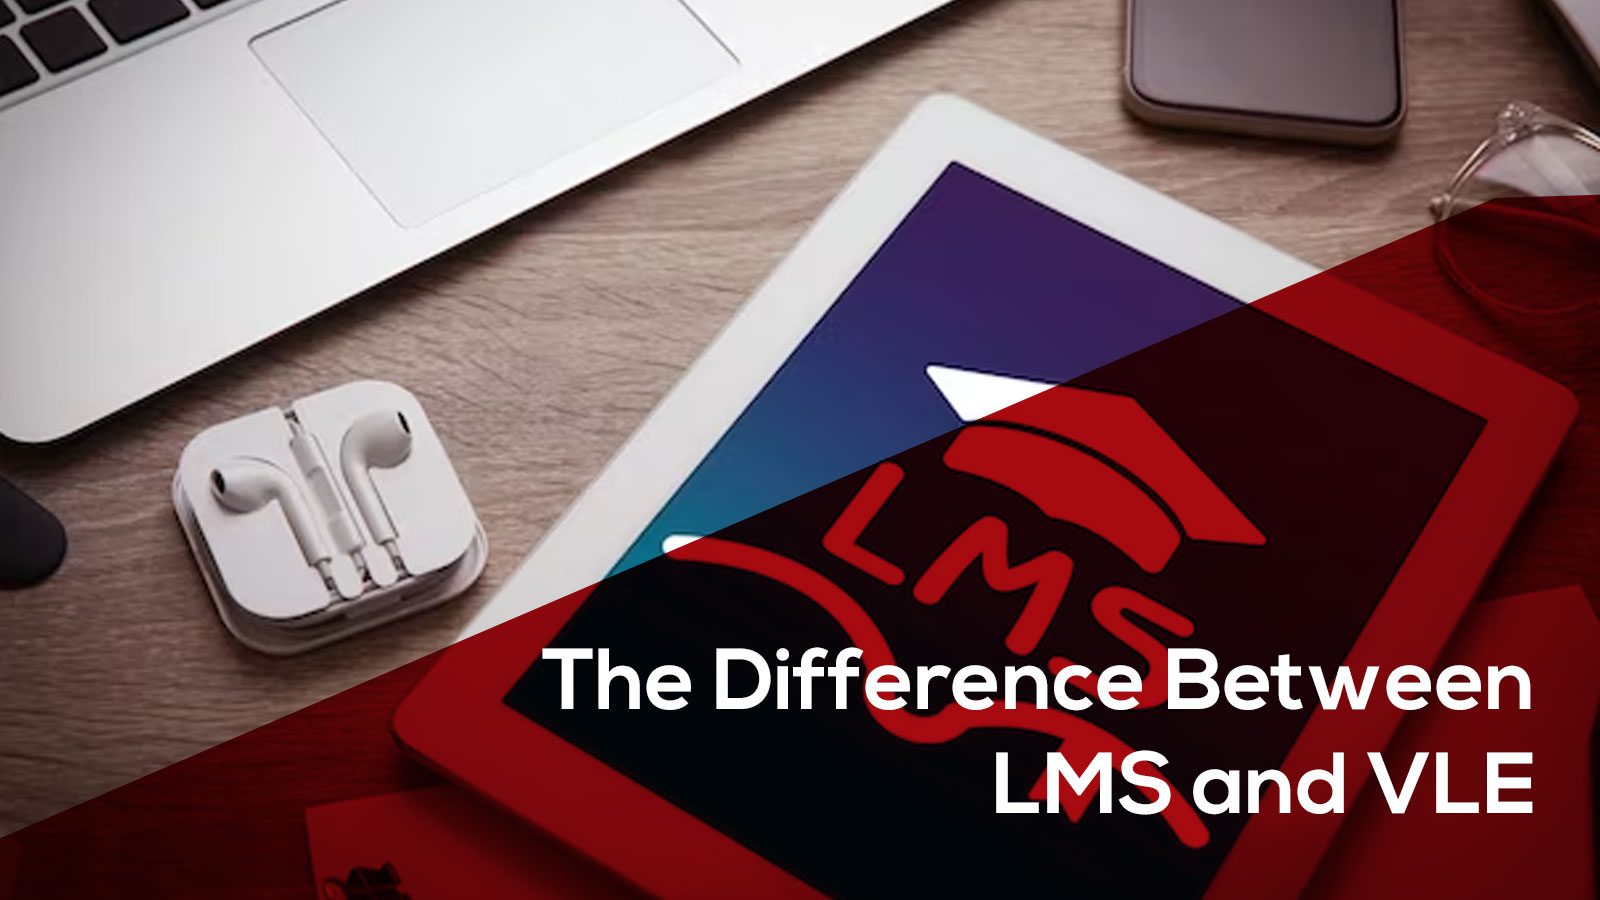 LMS and VLE